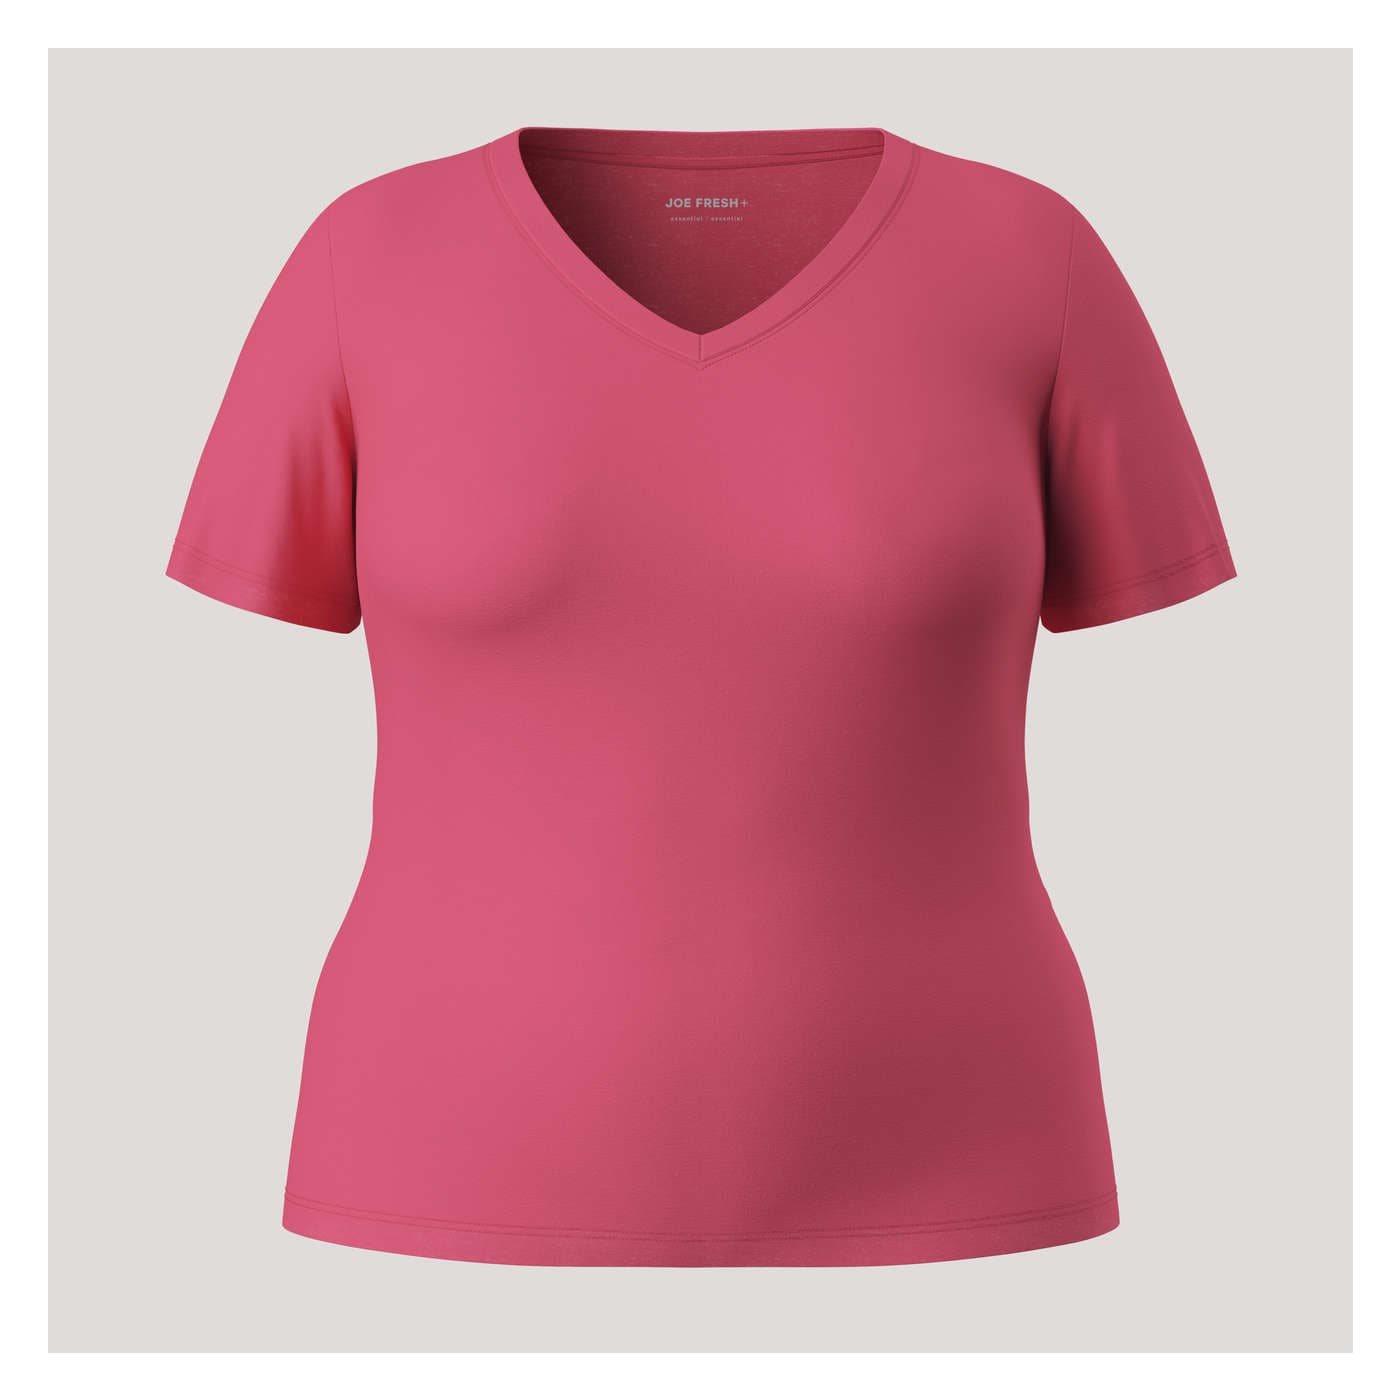 Just My Size Women's Plus-Size Short Sleeve V-Neck Tee, Paleo Pink, 4X